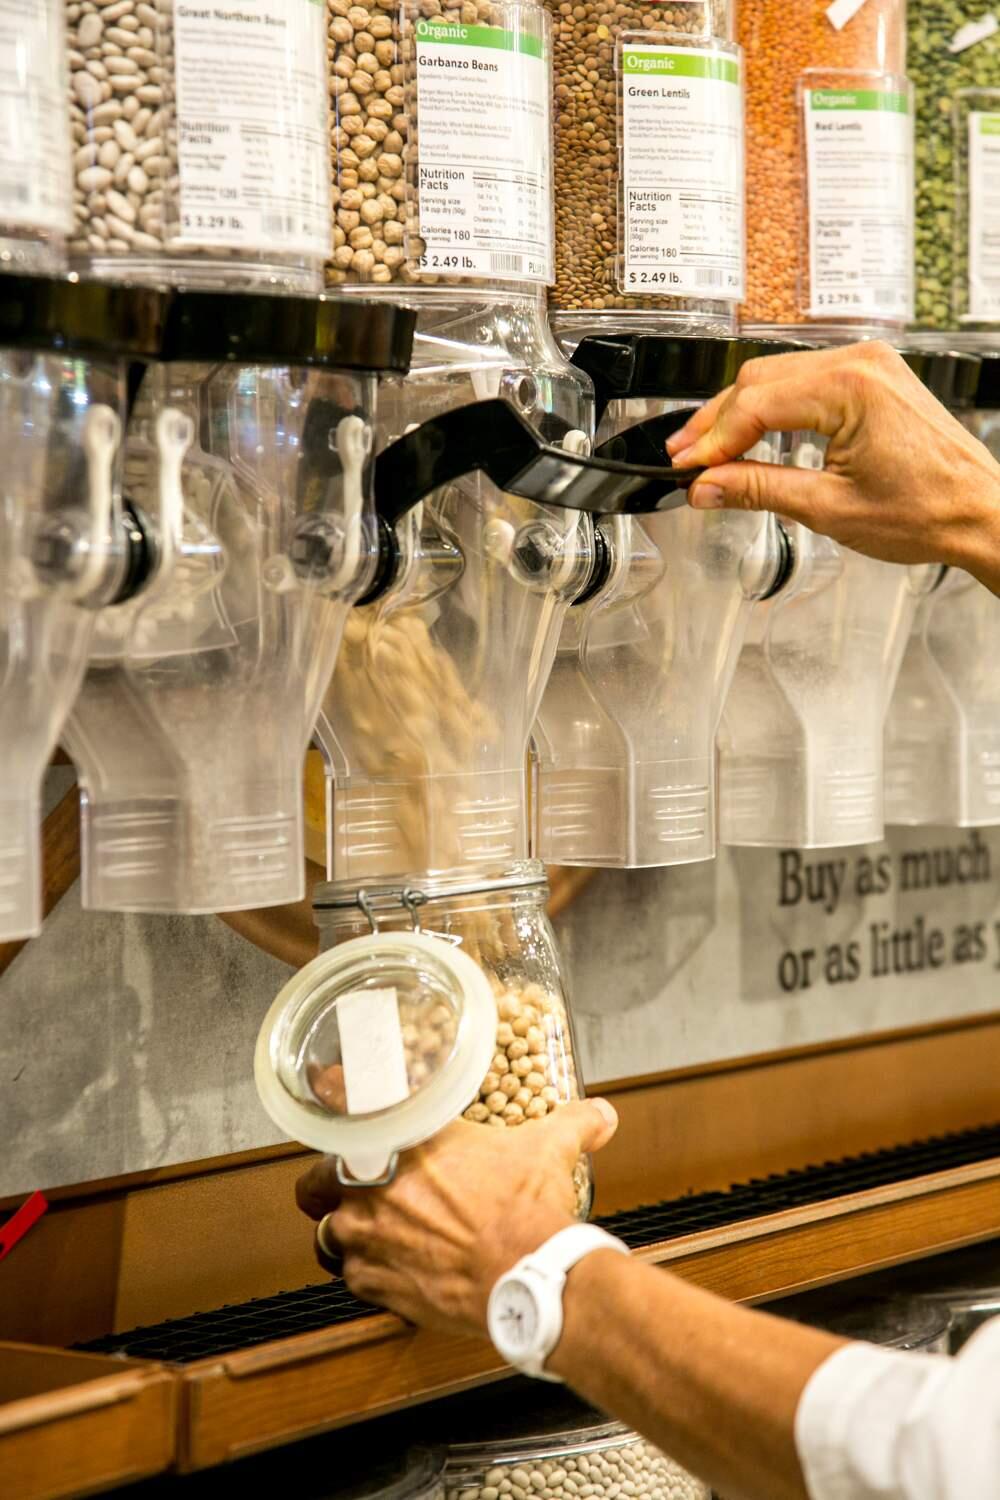 Glass jar, pre-labeled with weight, filled with garbanzo beans by Katherine Llodra, in an effort to eliminate waste here shopping at Whole Foods in Sonoma. Tuesday, Oct. 1, 2019. (Photo by Julie Vader/special to the Index-Tribune)